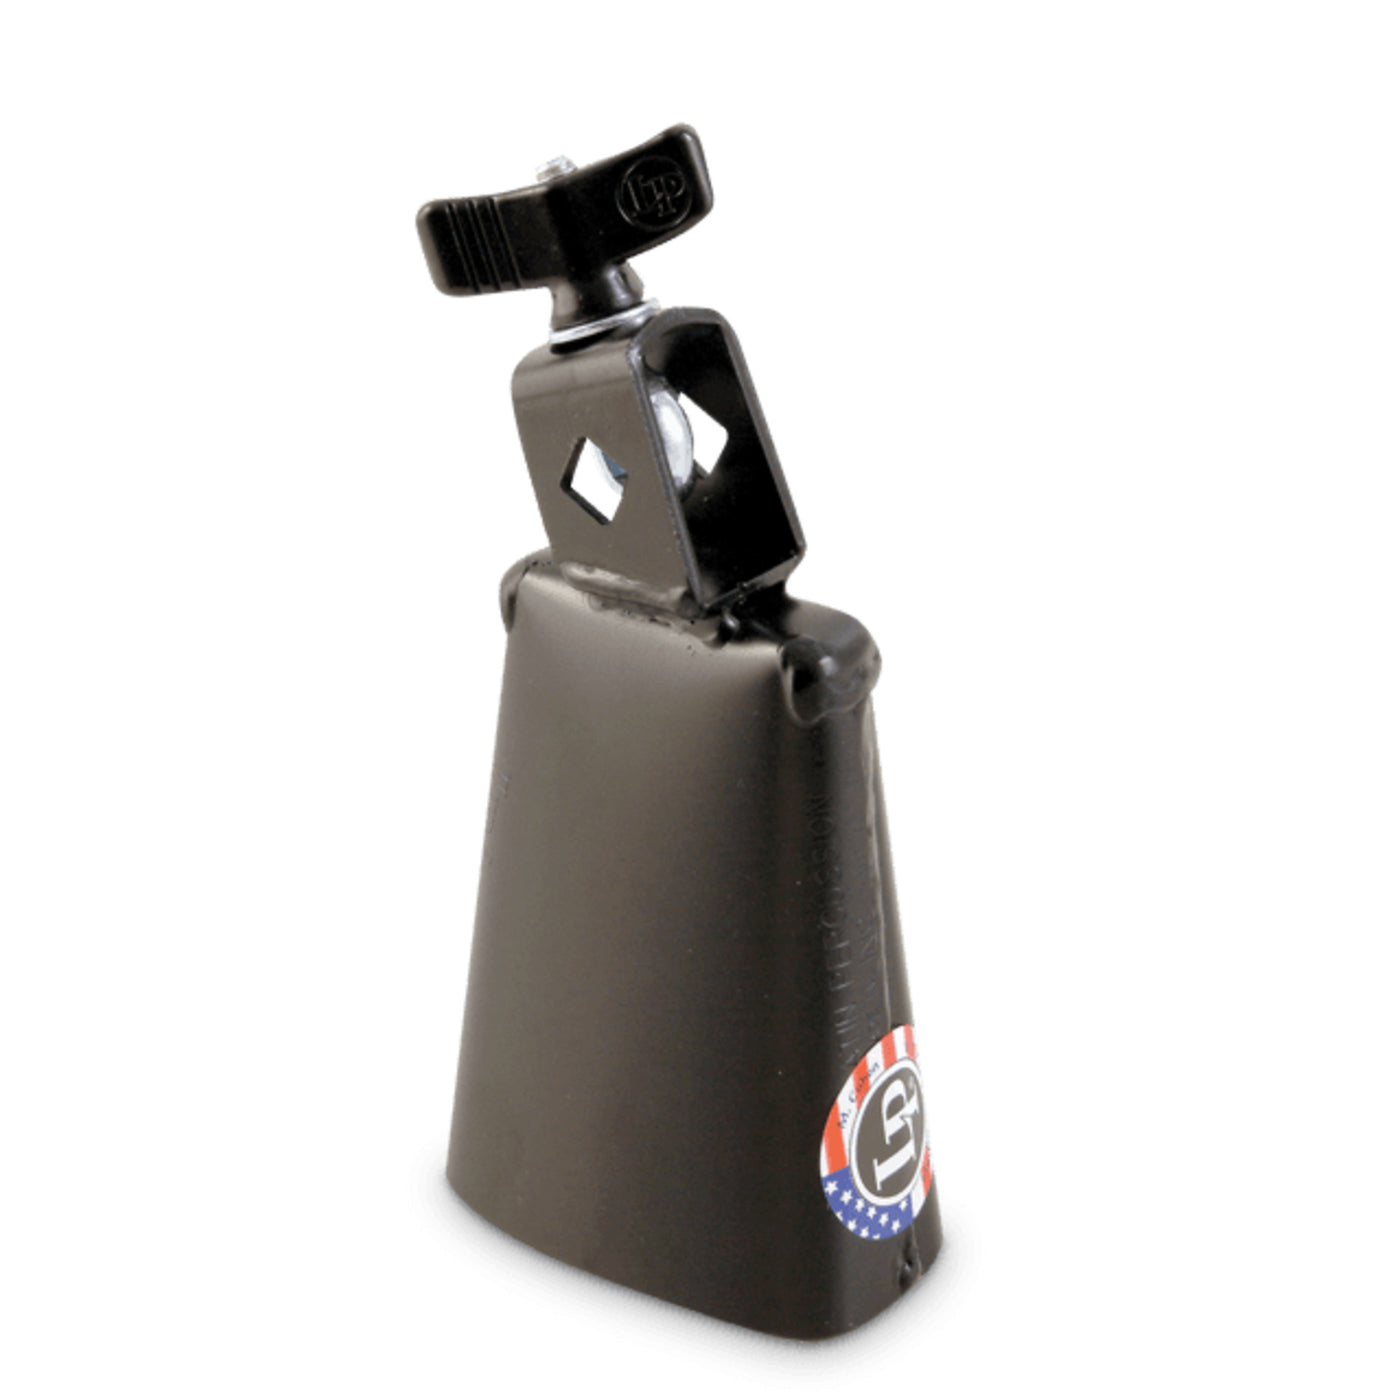 Latin Percussion Tapon Model Cowbell, Black (LP575)